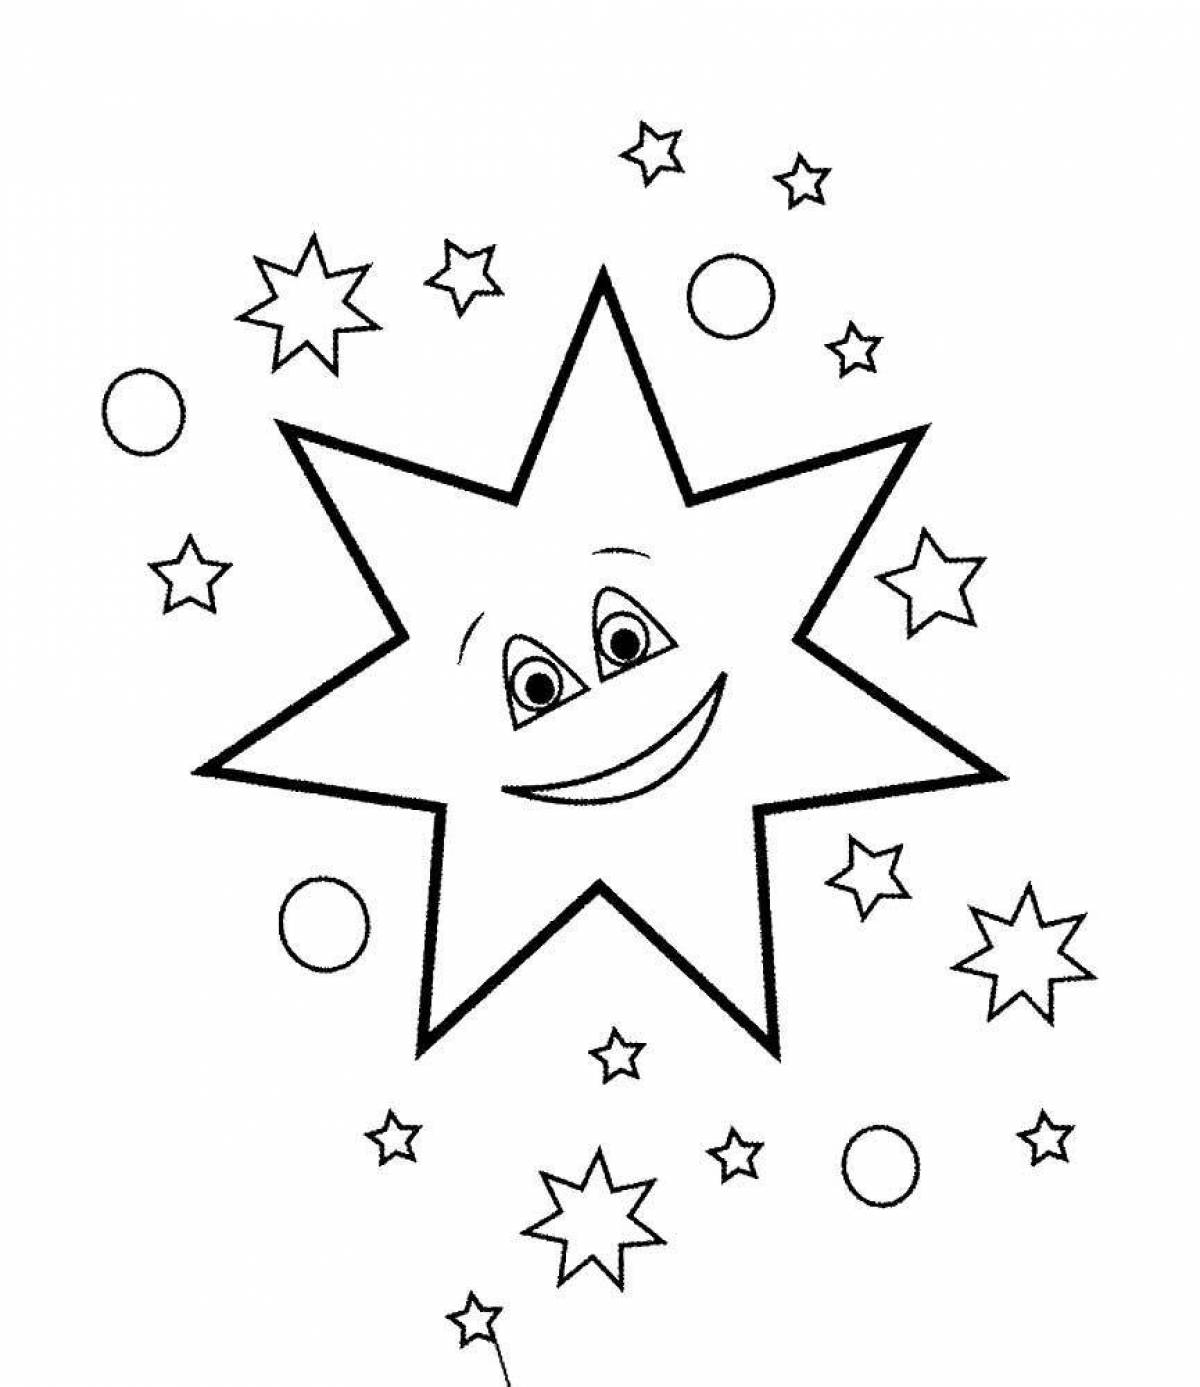 Glowing star coloring book for kids